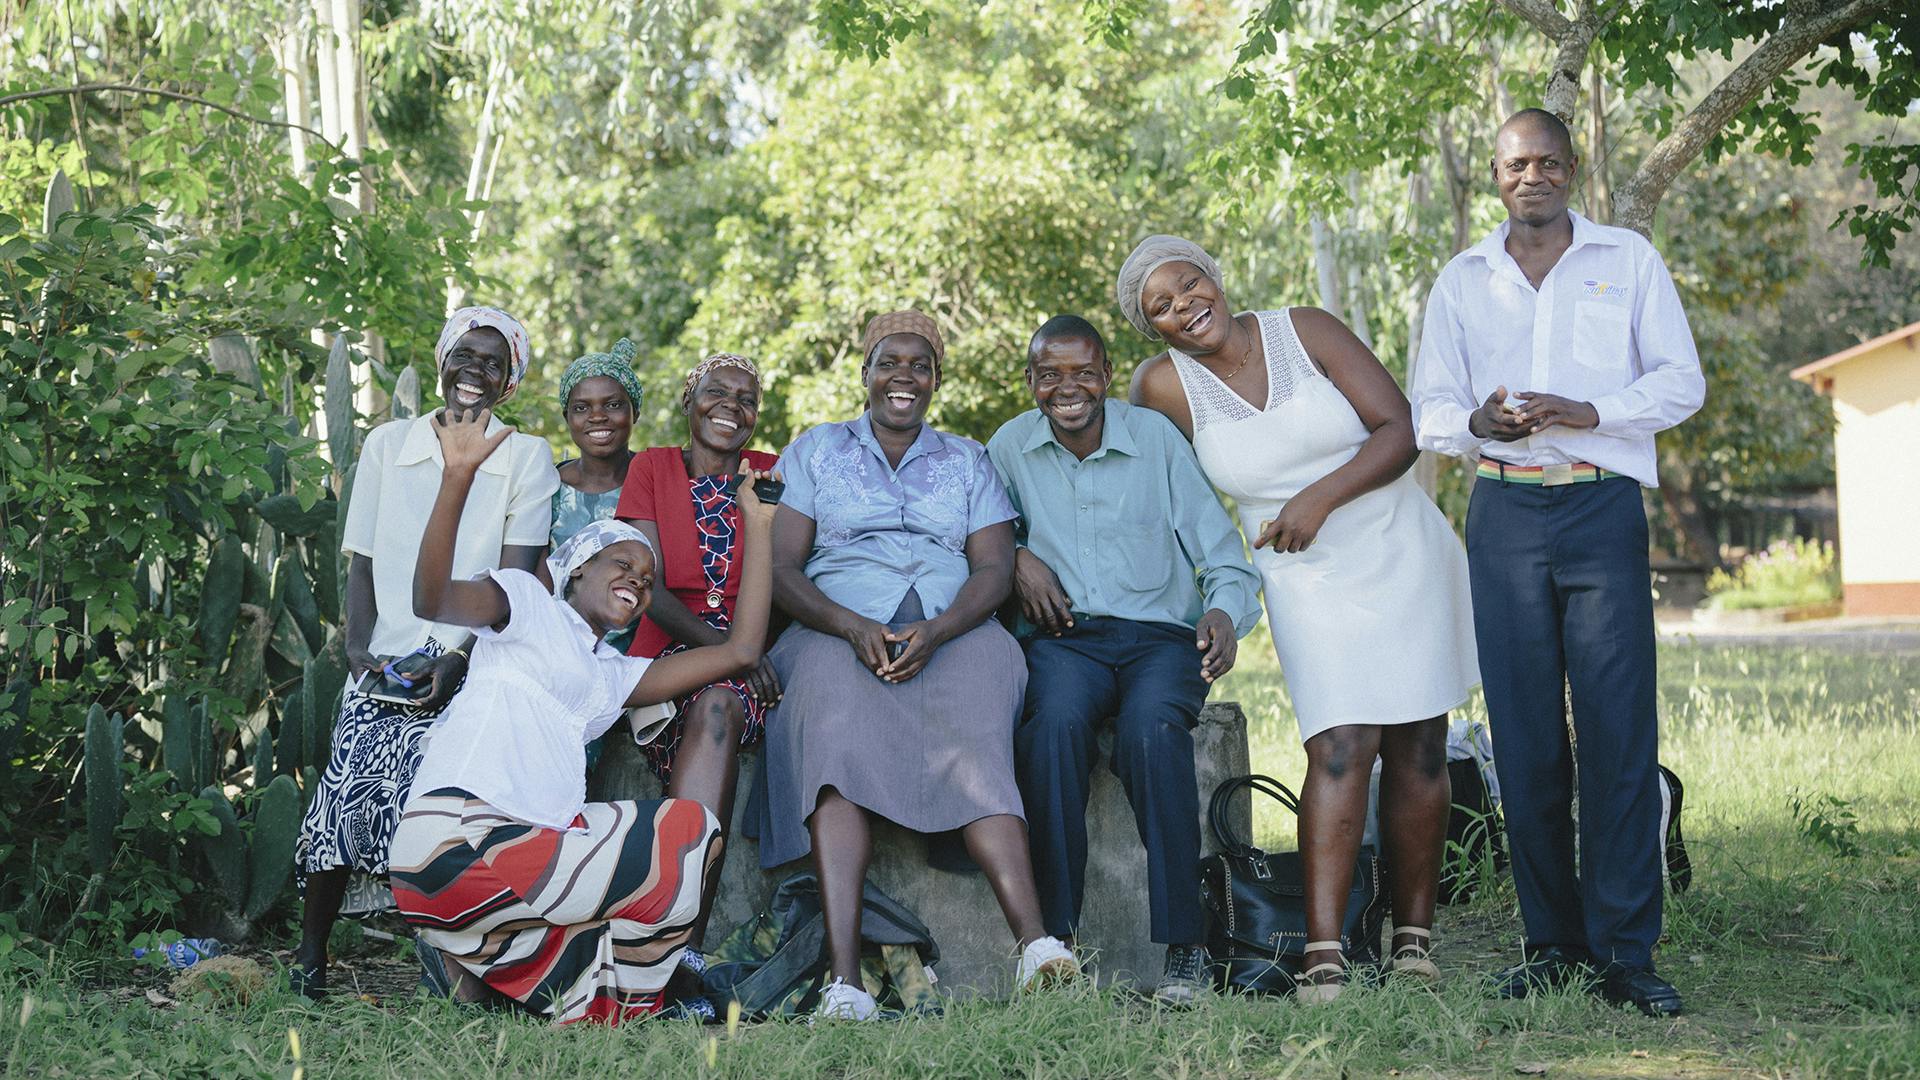 A group of Zimbabwean men and women outside in a green field with trees in the background.